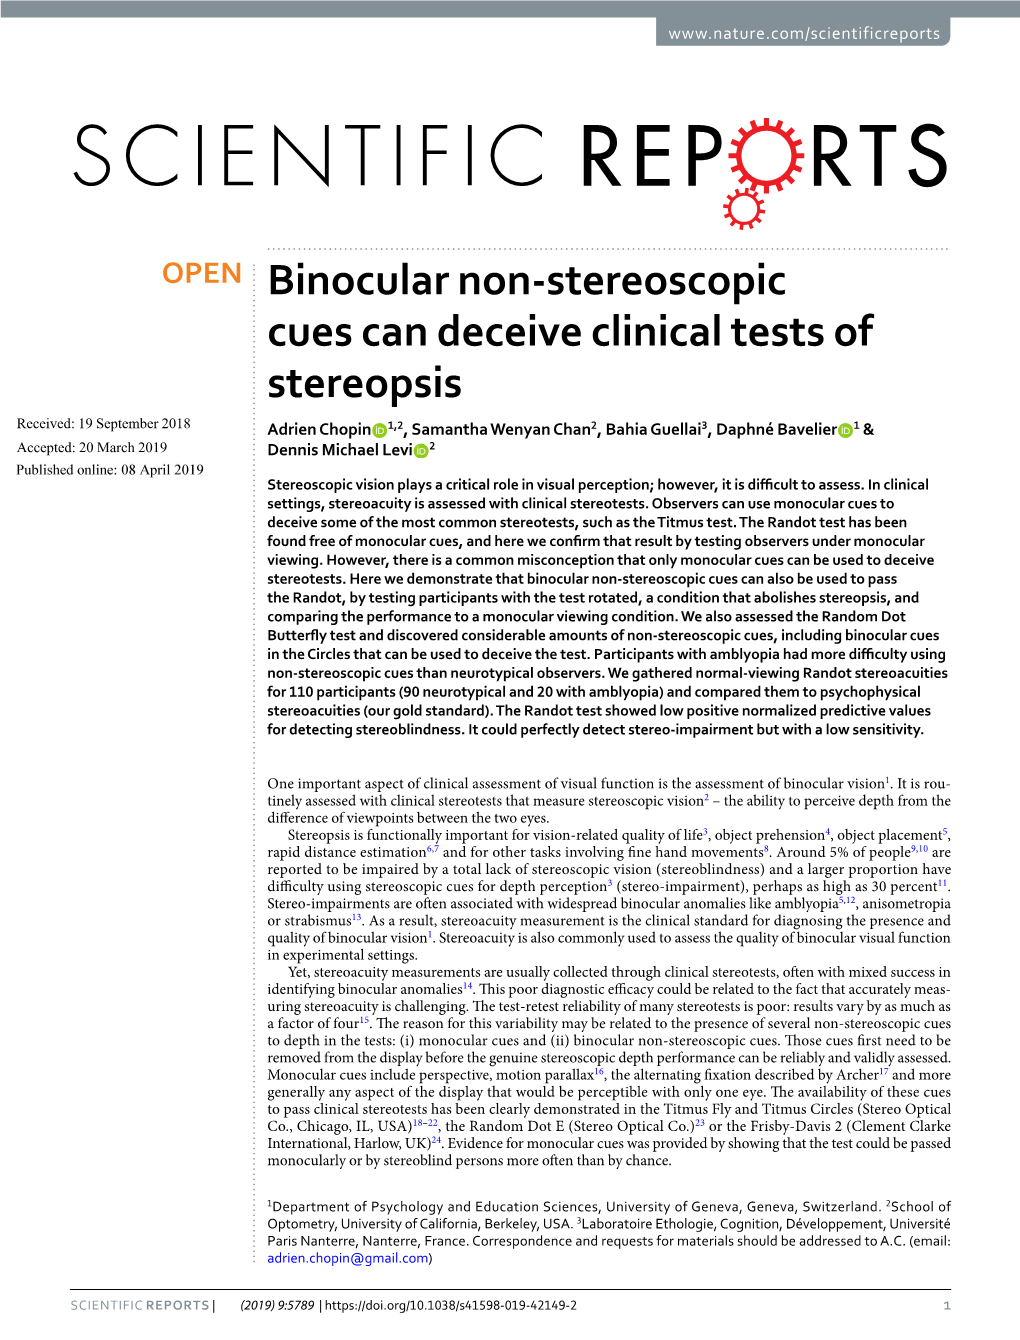 Binocular Non-Stereoscopic Cues Can Deceive Clinical Tests of Stereopsis